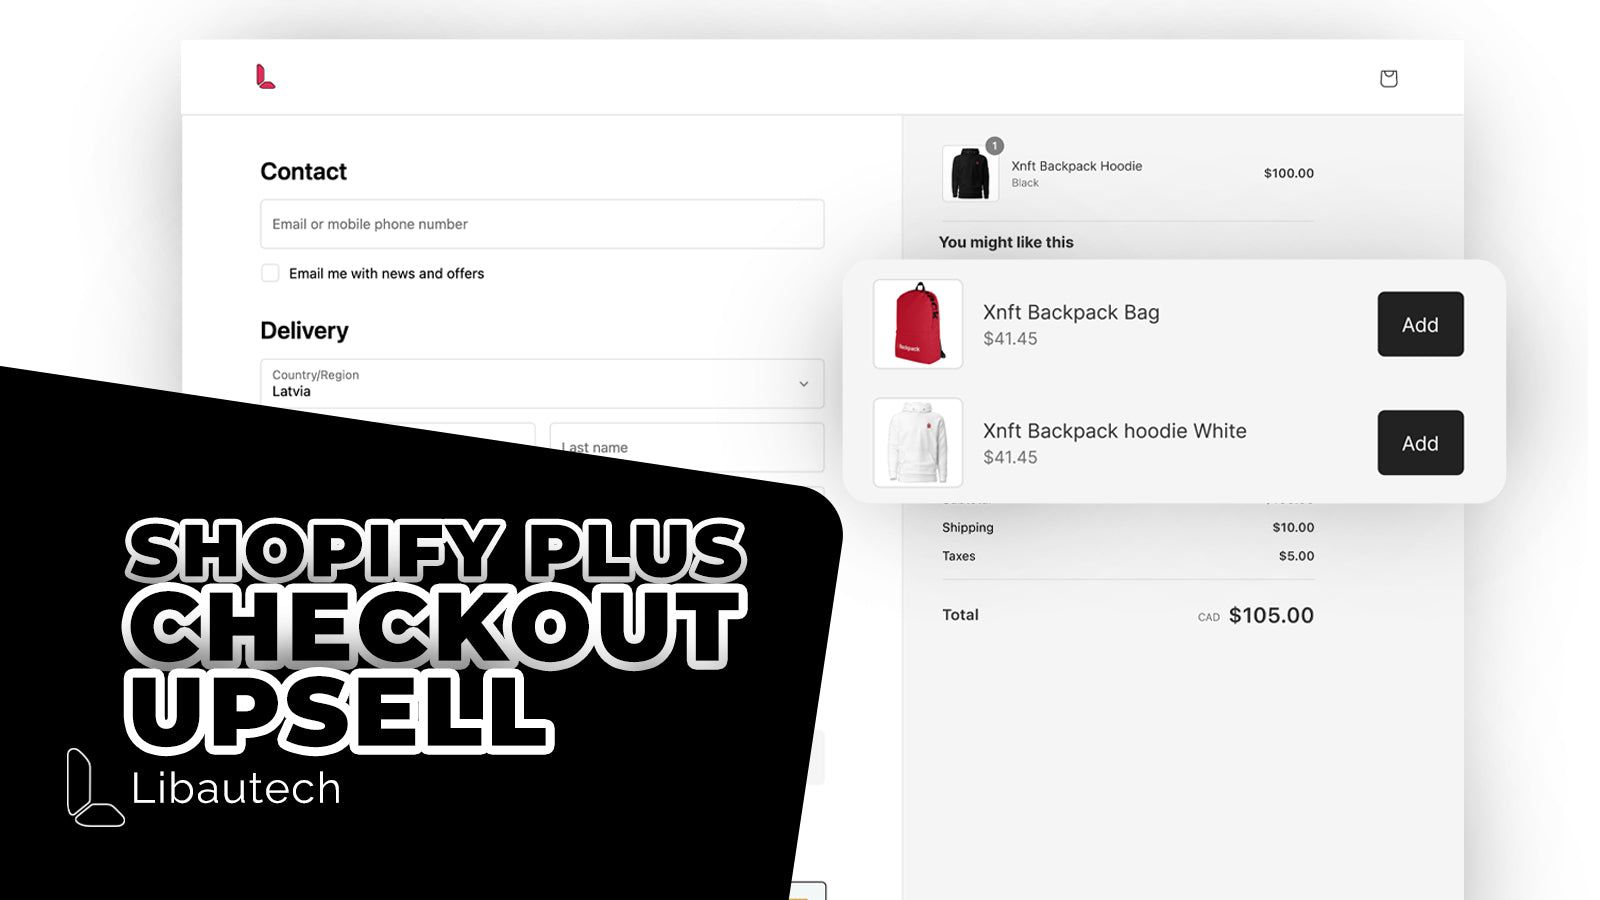 Shopify Plus Checkout Upsell offer